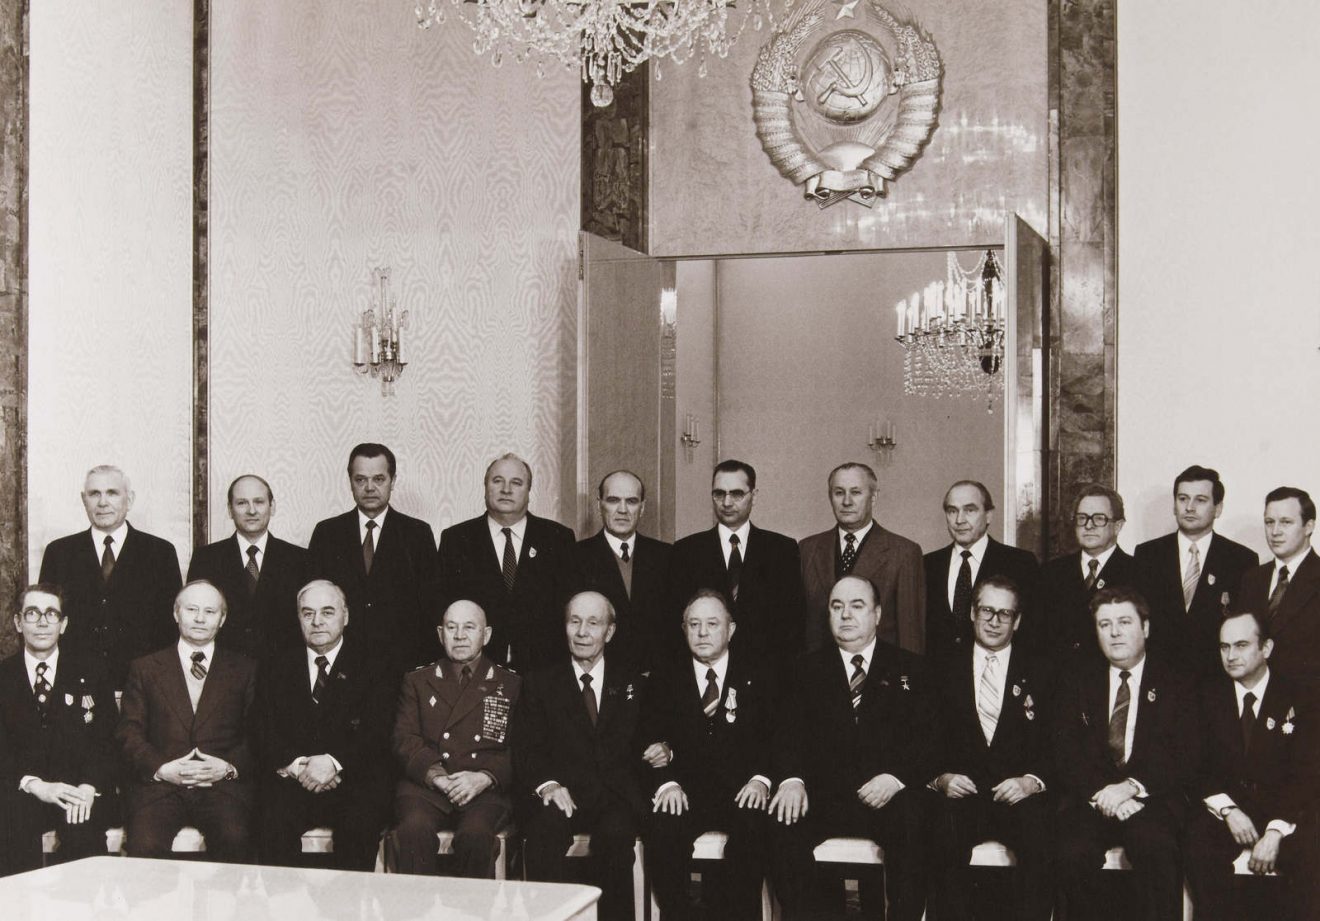 Unique photograph of the visit of the GDR STASI leaders (General Erich MIELKE, General Markus WOLF, etc.) to Moscow (USSR) during the winter of 1980.